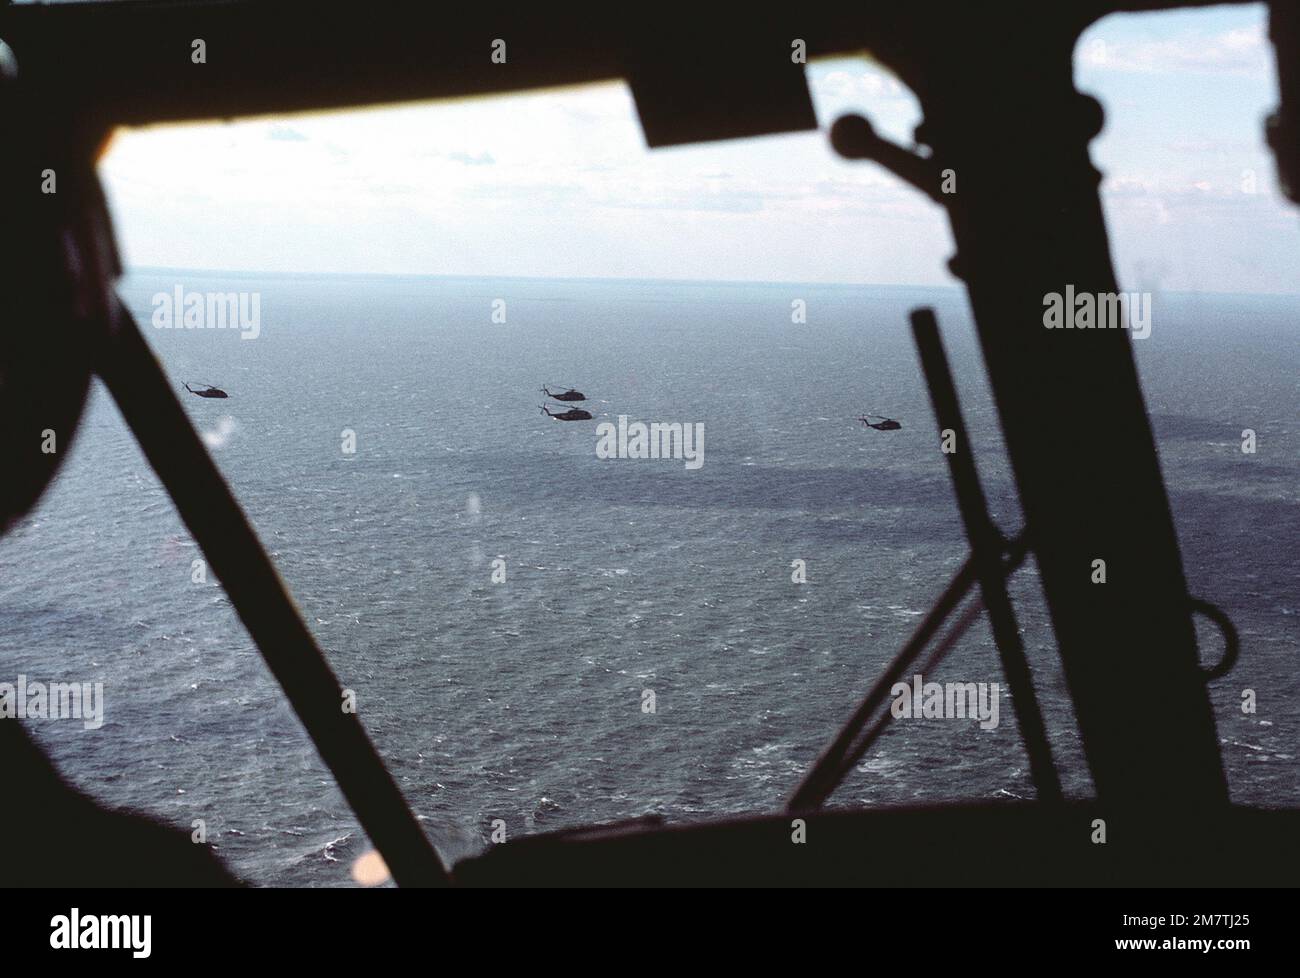 An air-to-air view of four RH-53D Sea Stallion helicopters as seen from the cockpit of an SH-3 Sea King helicopter during search and rescue (SAR) operations. Country: Chesapeake Bay Stock Photo